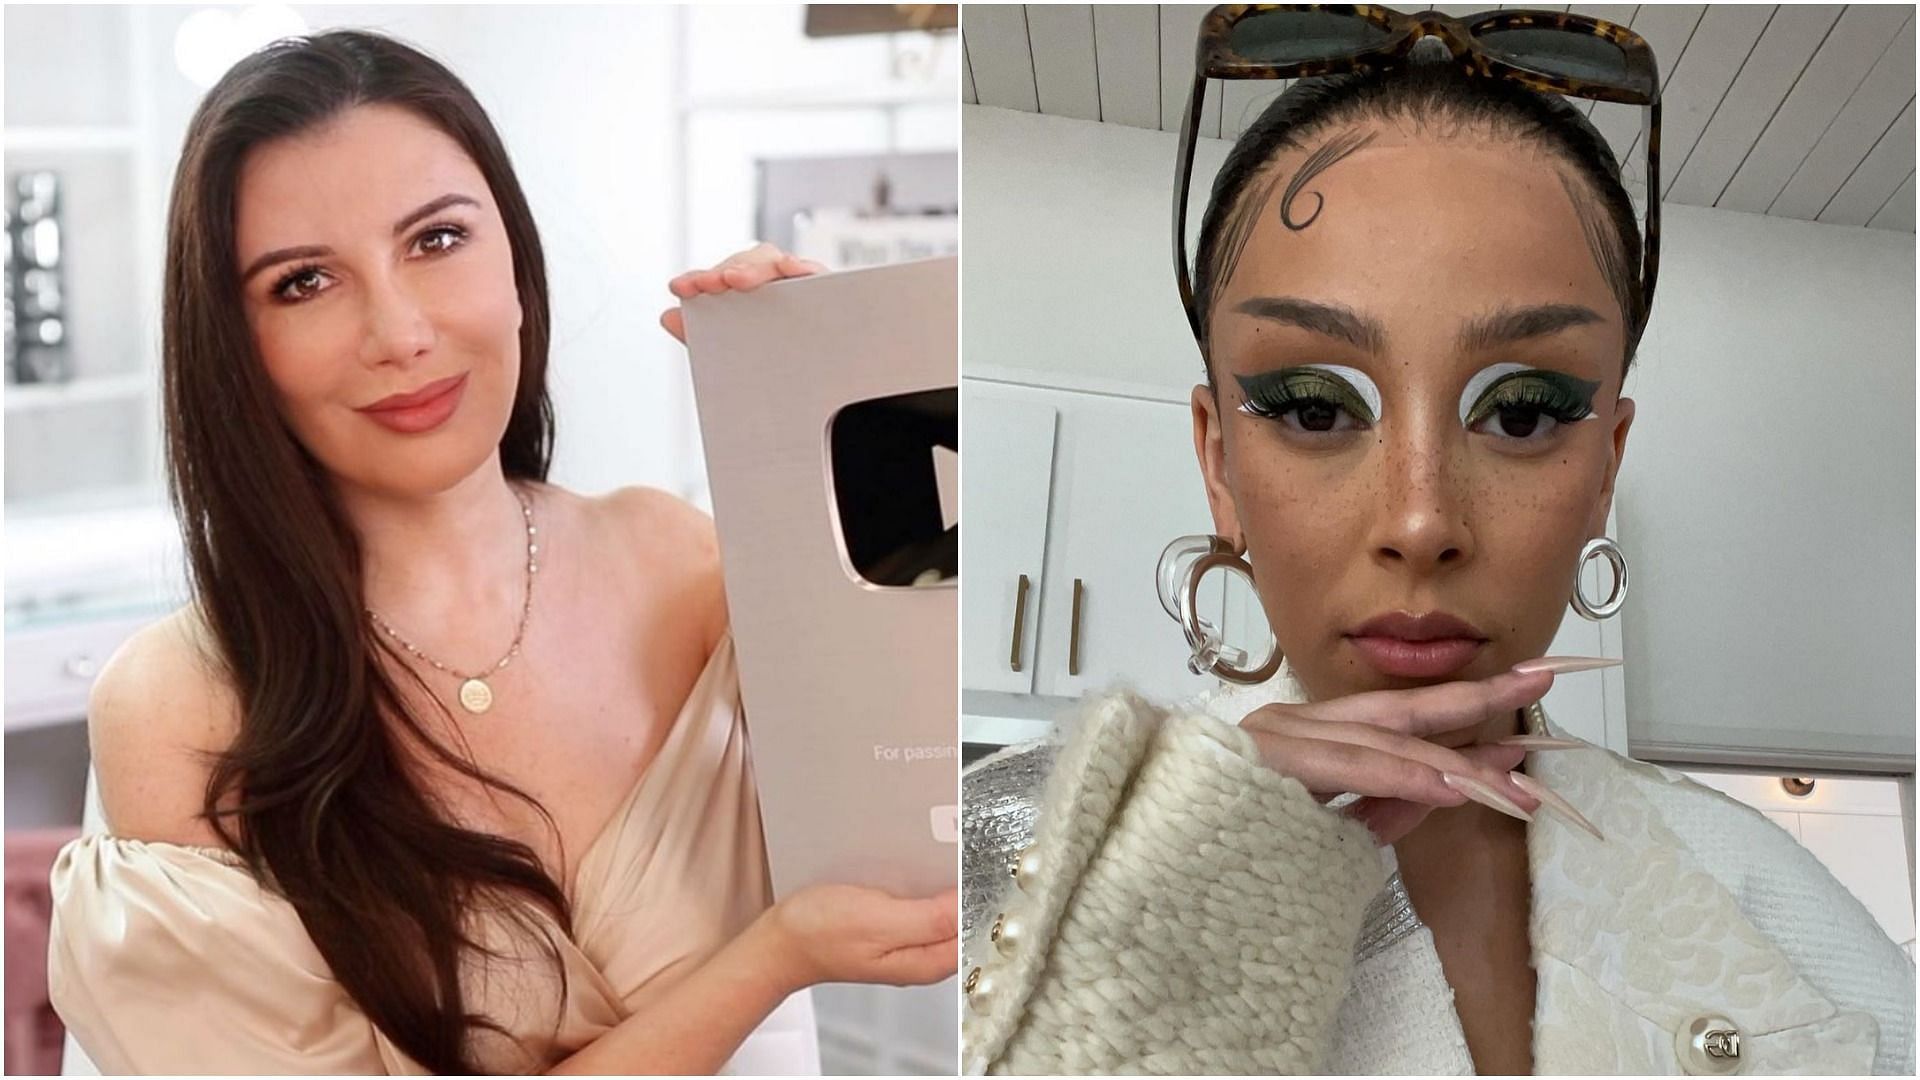 8 More of the Craziest Plastic Surgeries To Look Like Someone Else  Oddee